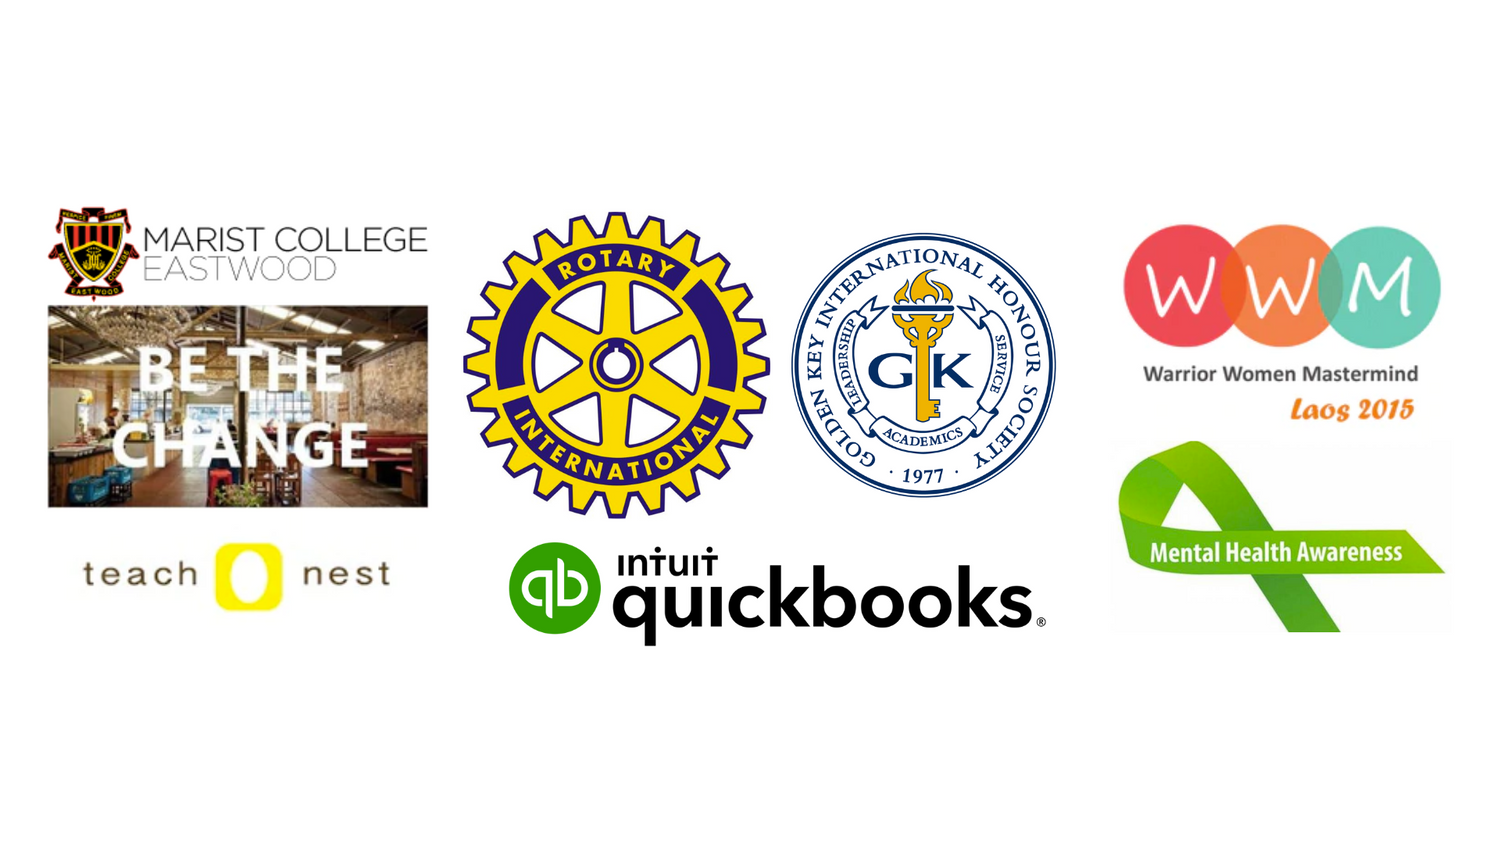 Logos where Anna Krjatian has attended to provide a keynote speech. These include: Marist College Eastwood, Be The Change Event, TeachNest, Rotaract, Golden Key International Honour Society, Quickbooks, Warrior Women's Mastermind, Mental Health Week Event